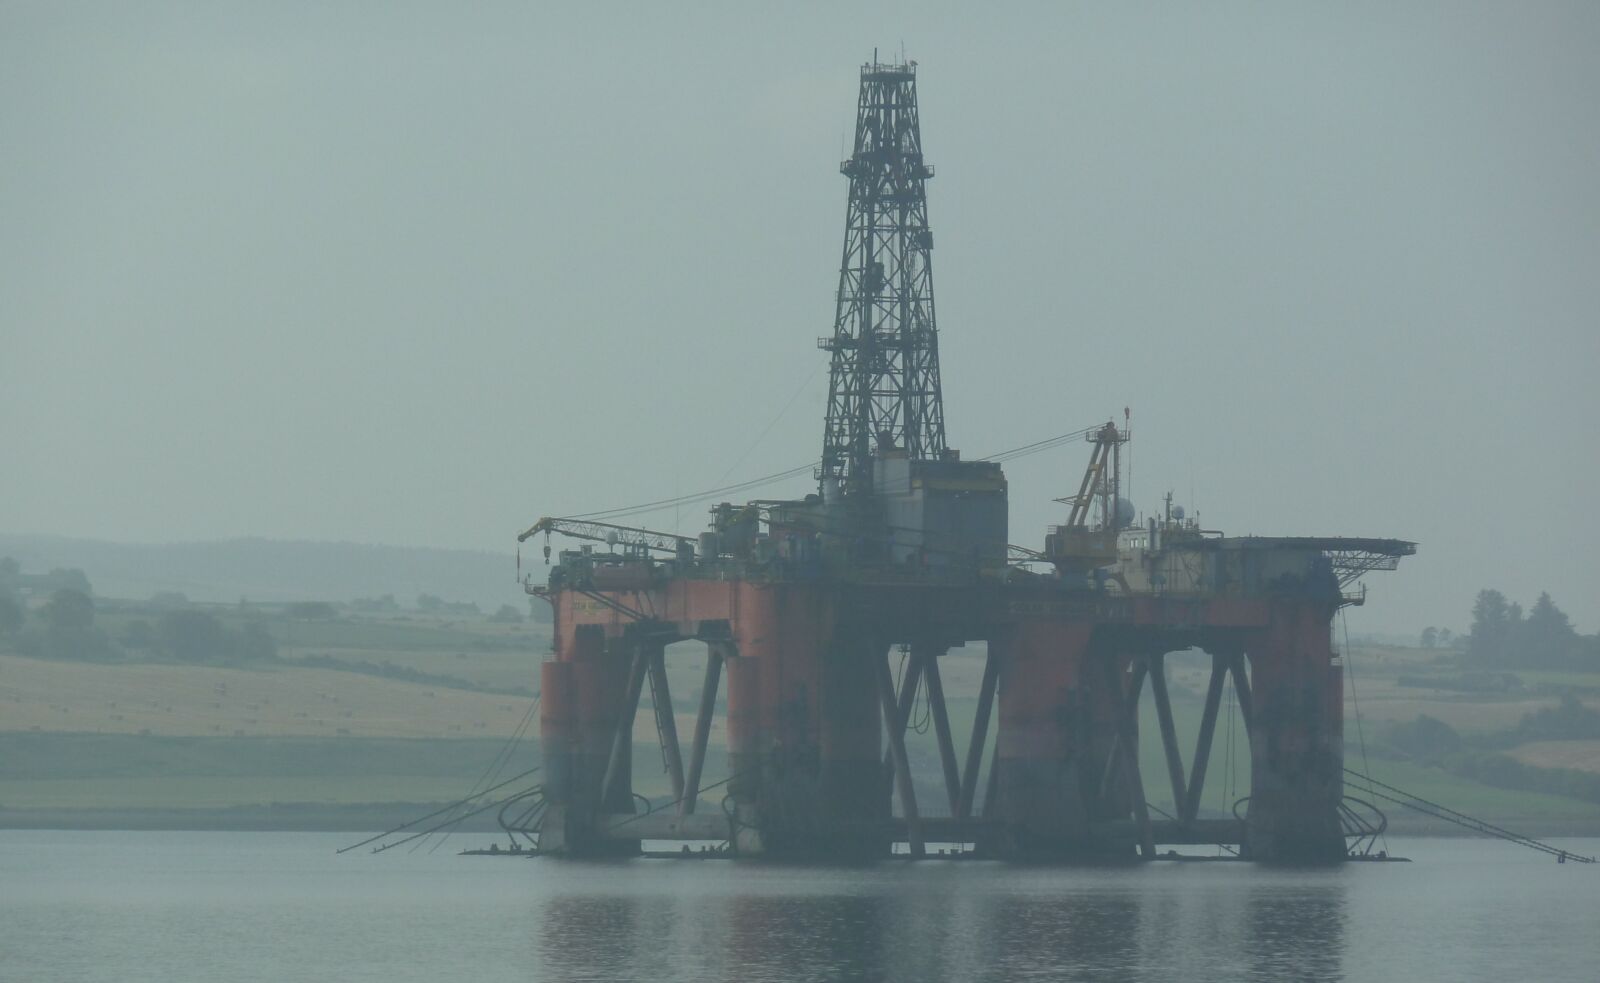 A large oil rig in the water